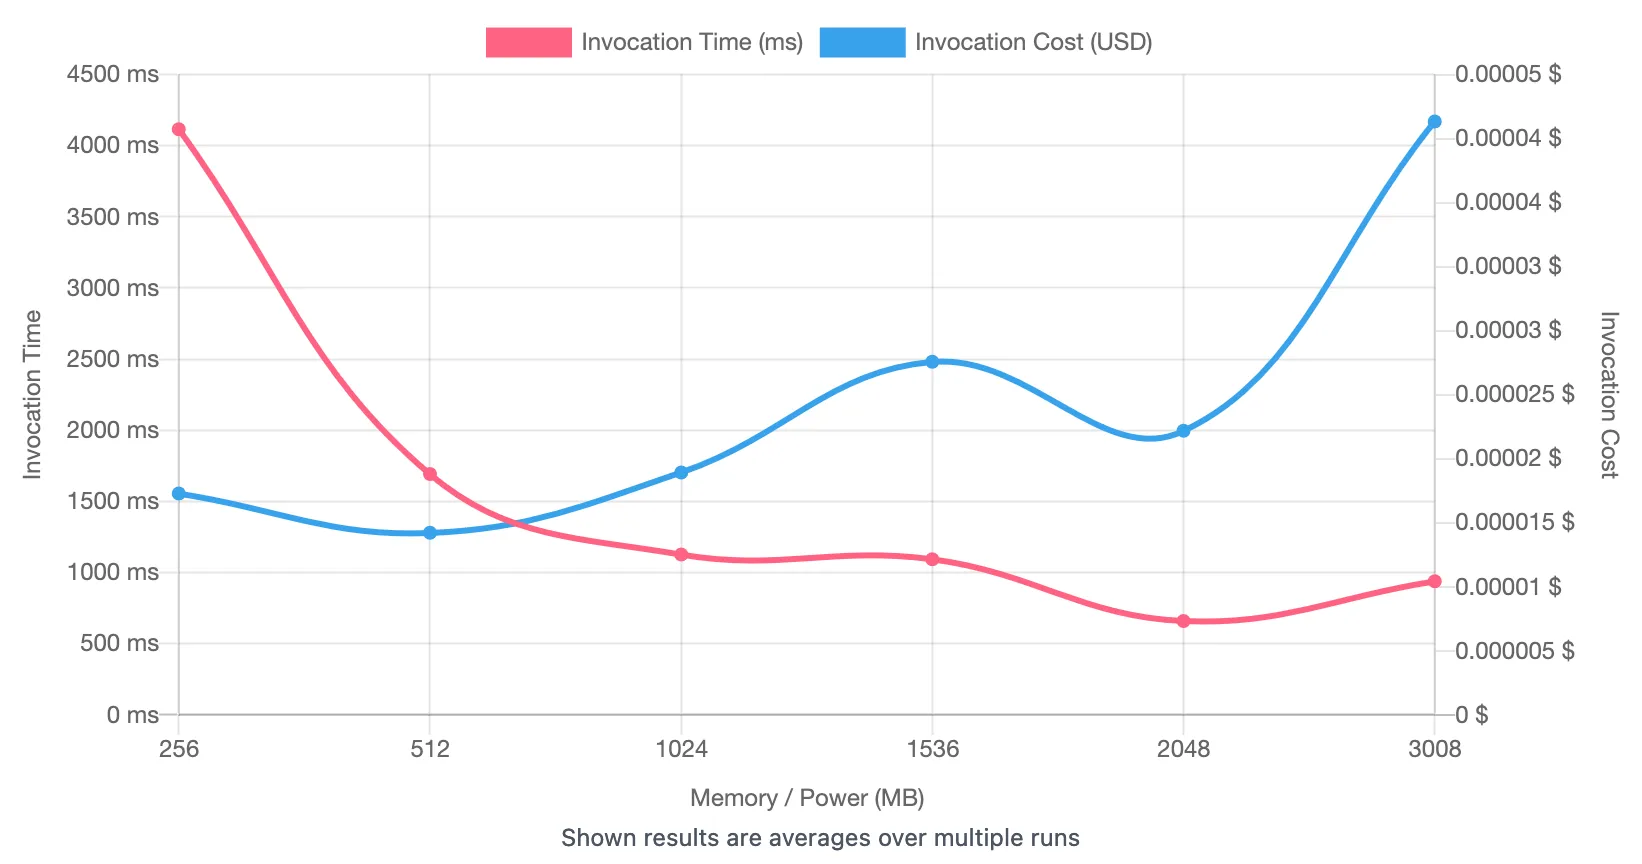 As memory increases, invocation time goes down and cost goes up. The graphs meet at roughly 1024MB.